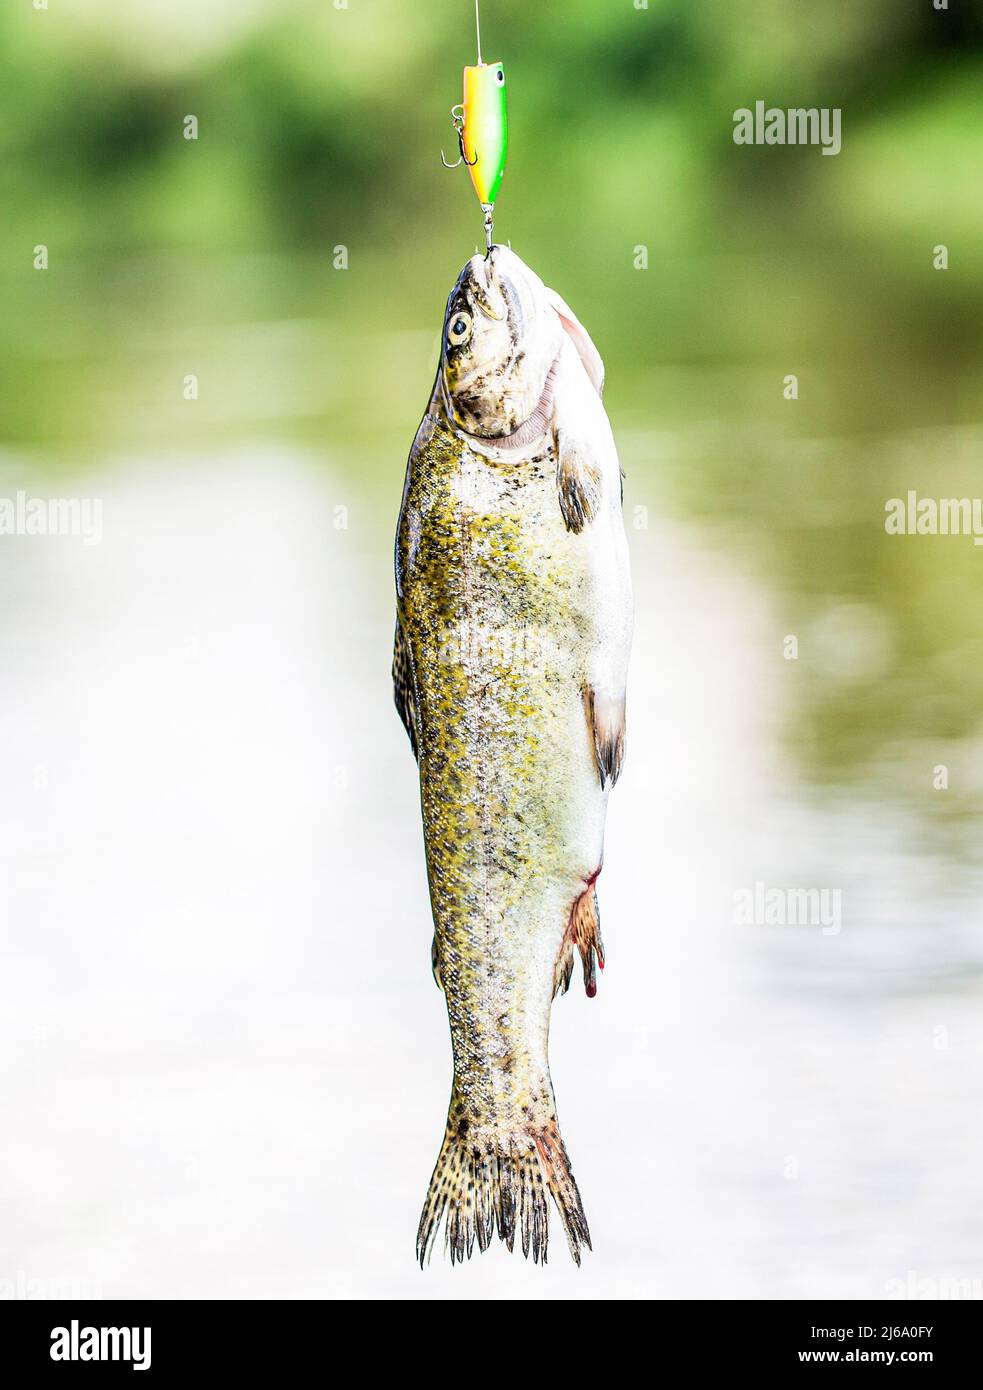 https://c8.alamy.com/comp/2J6A0FY/spinning-fishing-trout-in-lakes-brook-trout-a-close-up-rainbow-trouts-still-water-trout-fishing-fishing-close-up-shut-of-a-fish-hook-fisherman-2J6A0FY.jpg